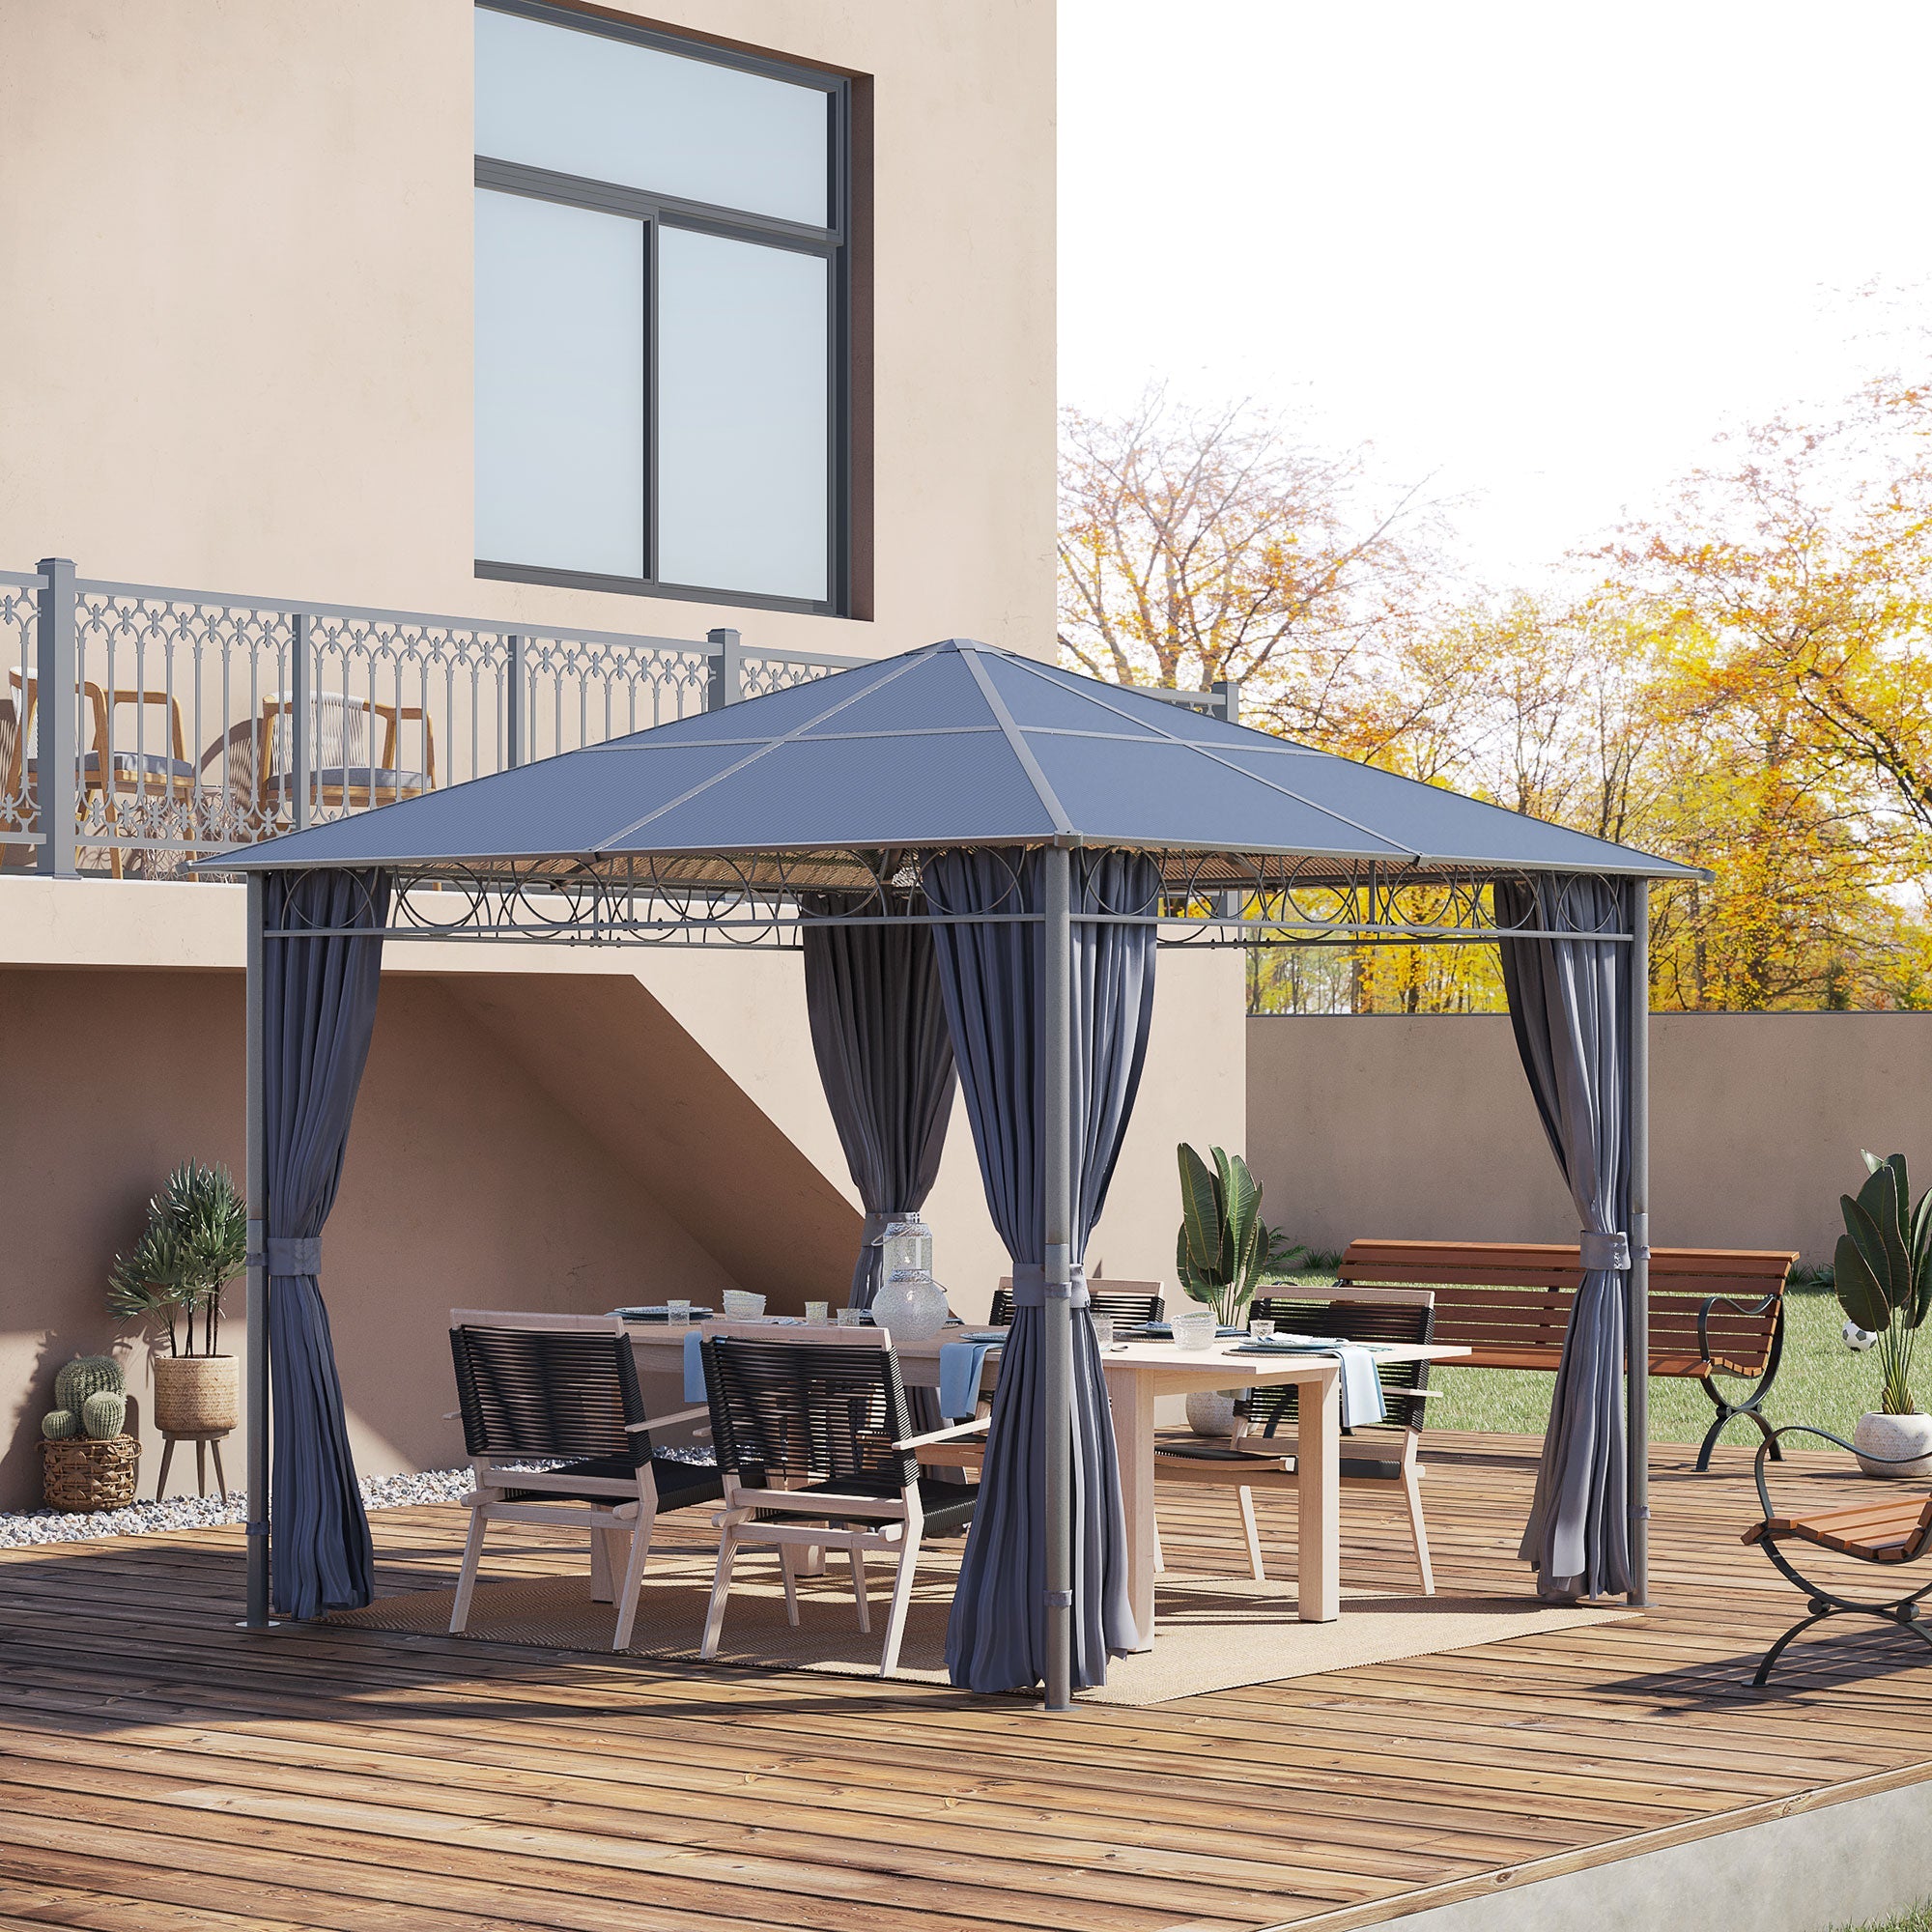 3 x 3(m) Hardtop Gazebo with UV Resistant Polycarbonate Roof, Steel & Aluminum Frame, Garden Pavilion with Curtains, Grey-1